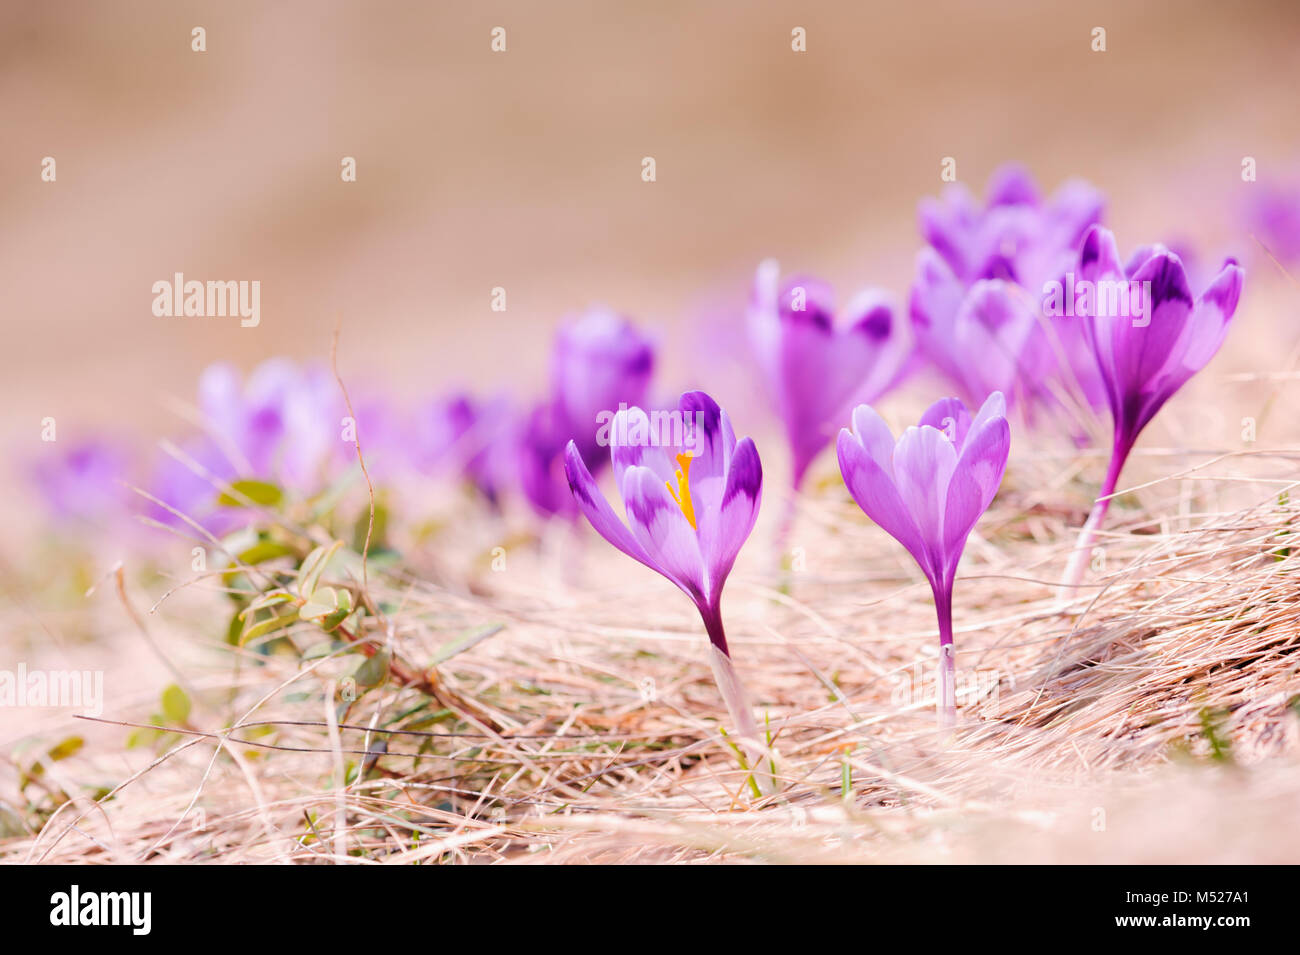 Group of crocus flower in grass Stock Photo